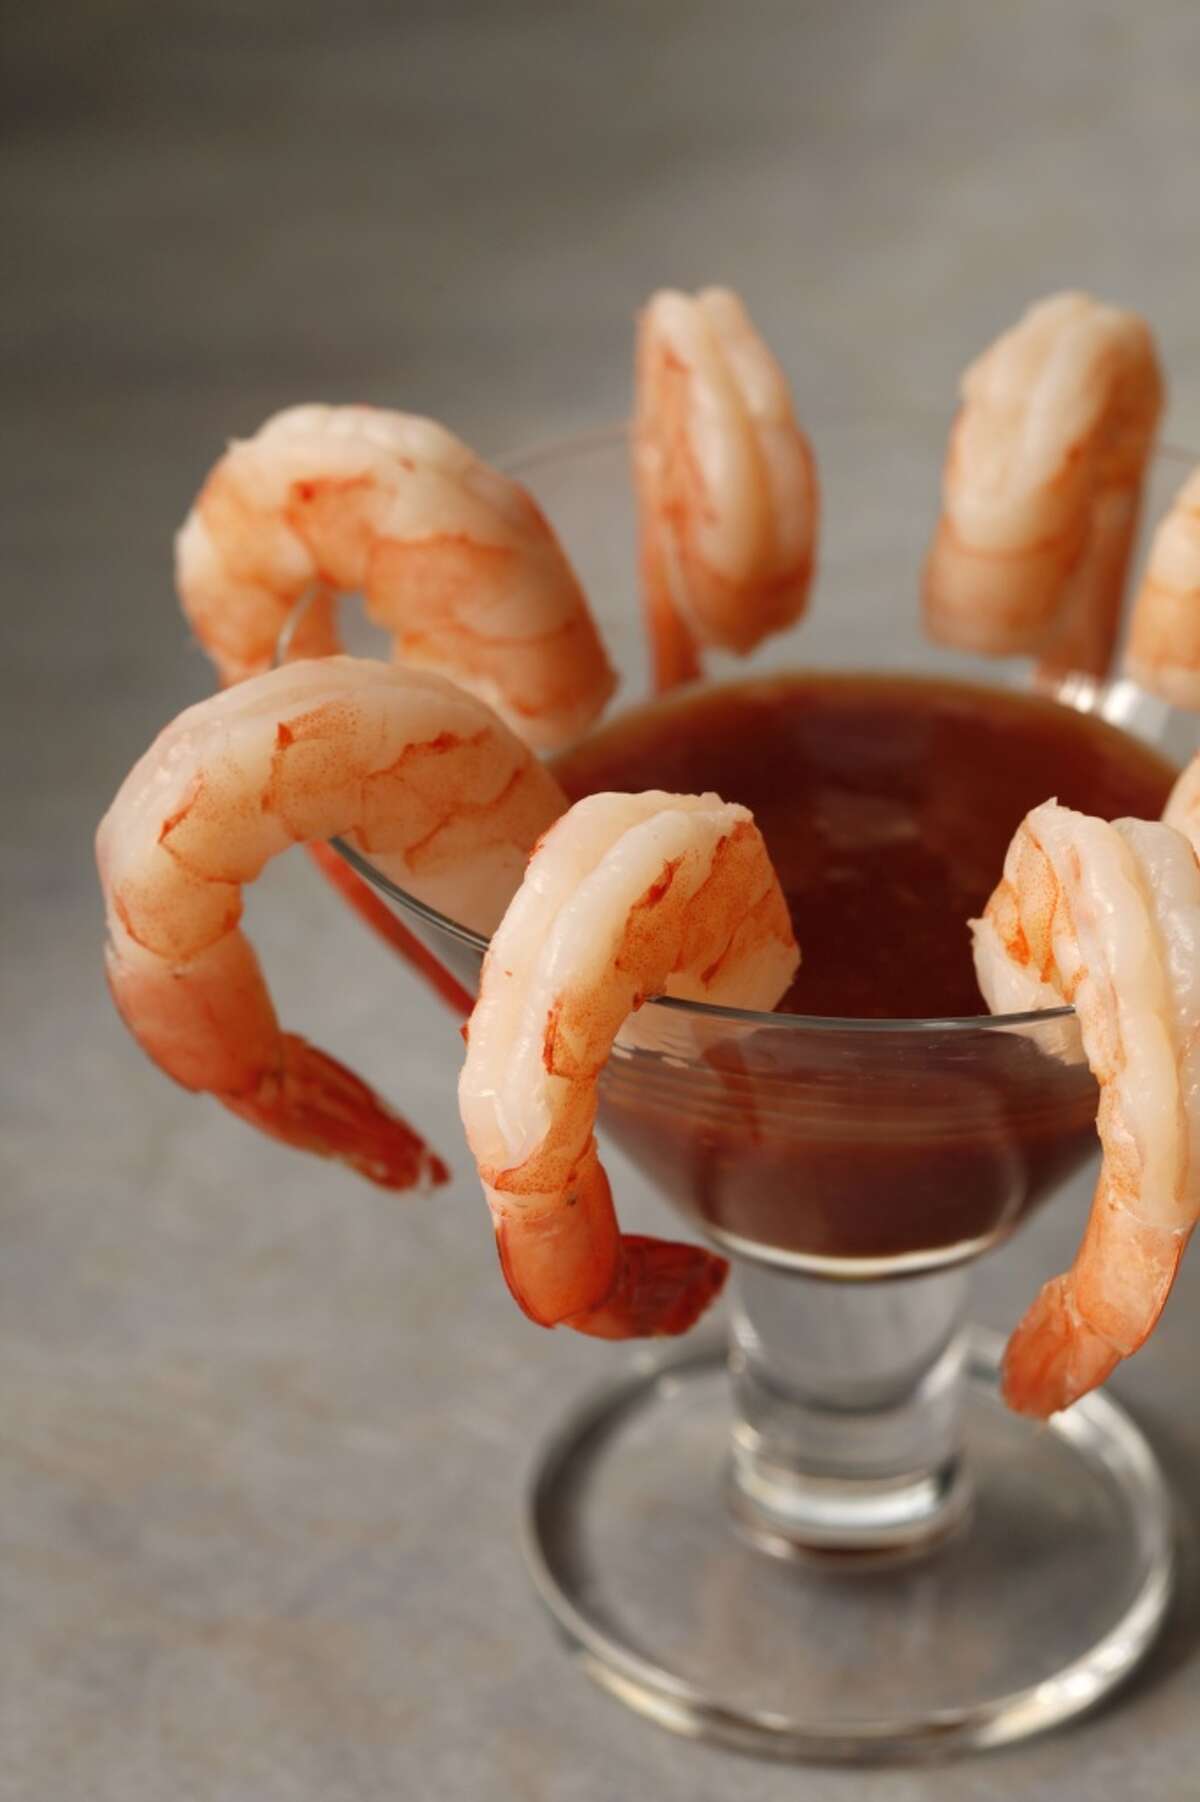 Big 4 Restaurant's vodka-soaked shrimp with Blood May cocktail sauce